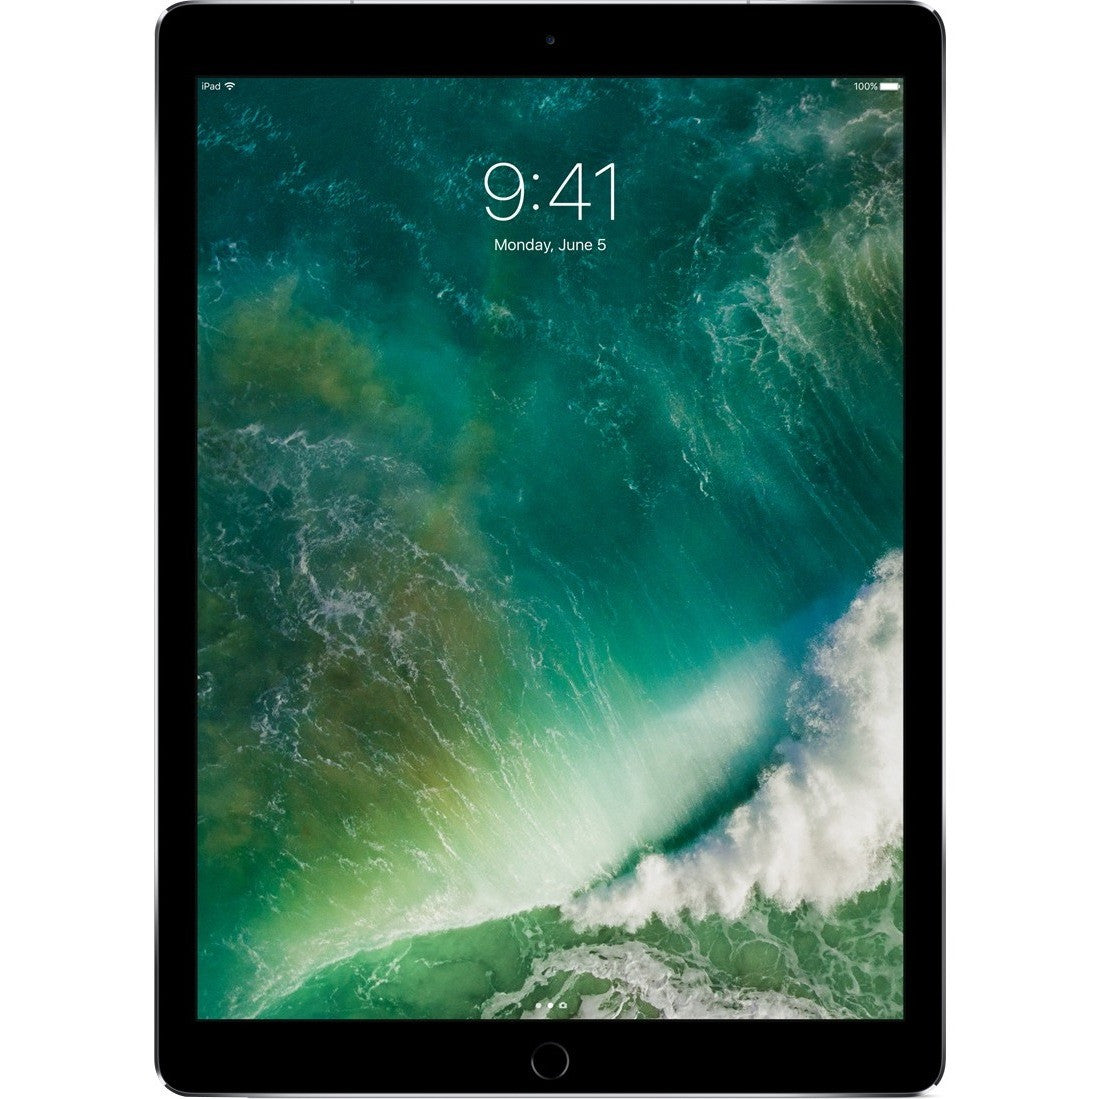 Apple iPad Pro Tablet - 12.9" - Apple A10X Hexa-core (6 Core) - 512 GB - iOS 10 - 2732 x 2048 - Retina Display - 4G - GSM, CDMA2000 Supported - Space Gray